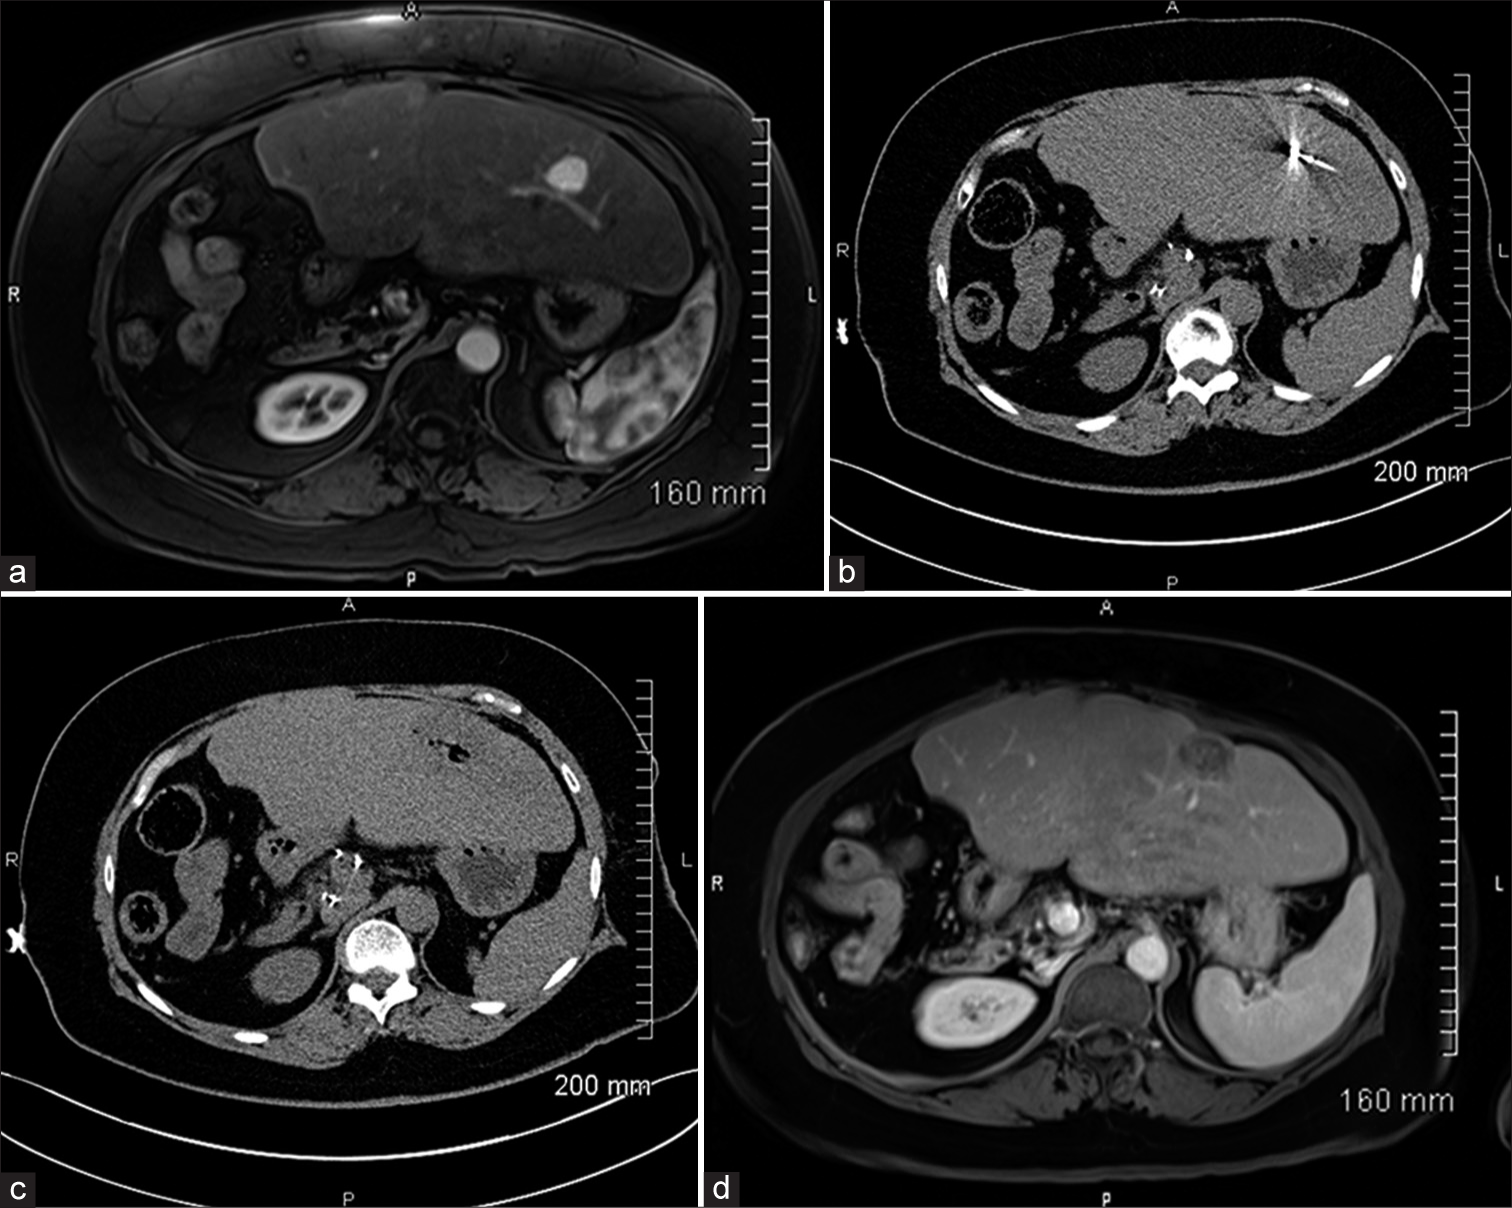 Percutaneous microwave ablation for early-stage intrahepatic cholangiocarcinoma: A single-institutional cohort